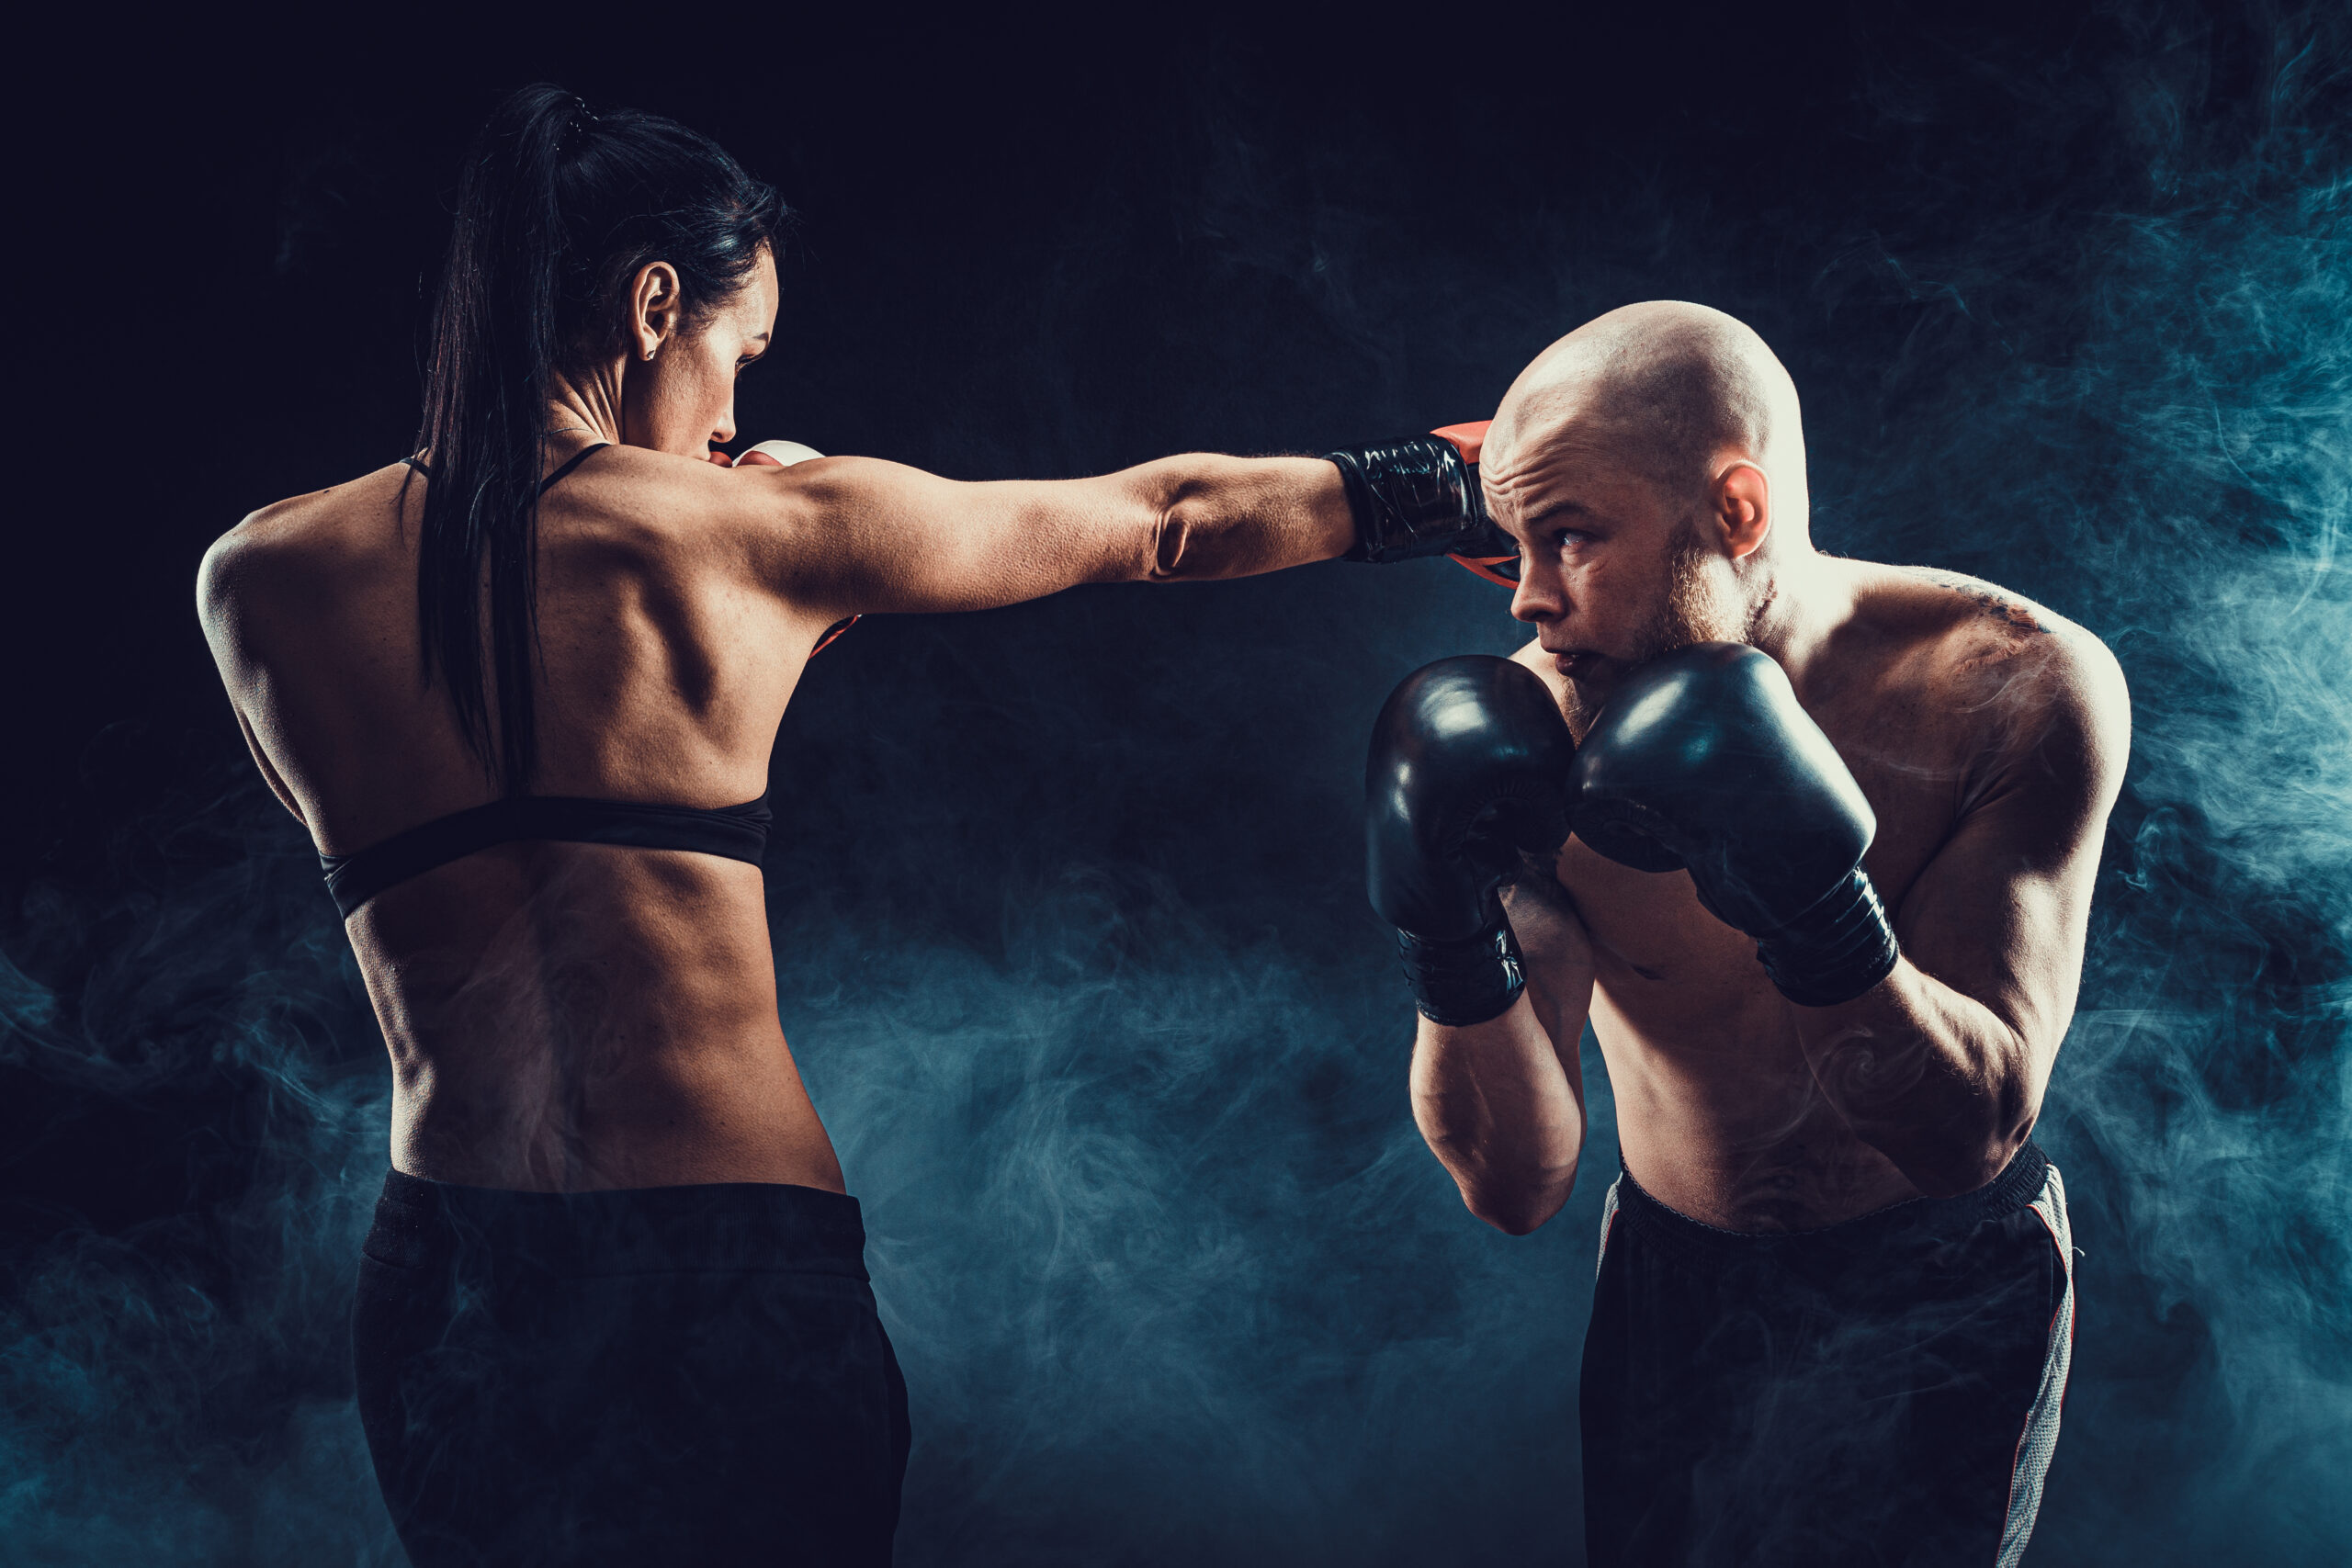 Shirtless Woman exercising with trainer at boxing and self defense lesson, studio, smoke on background